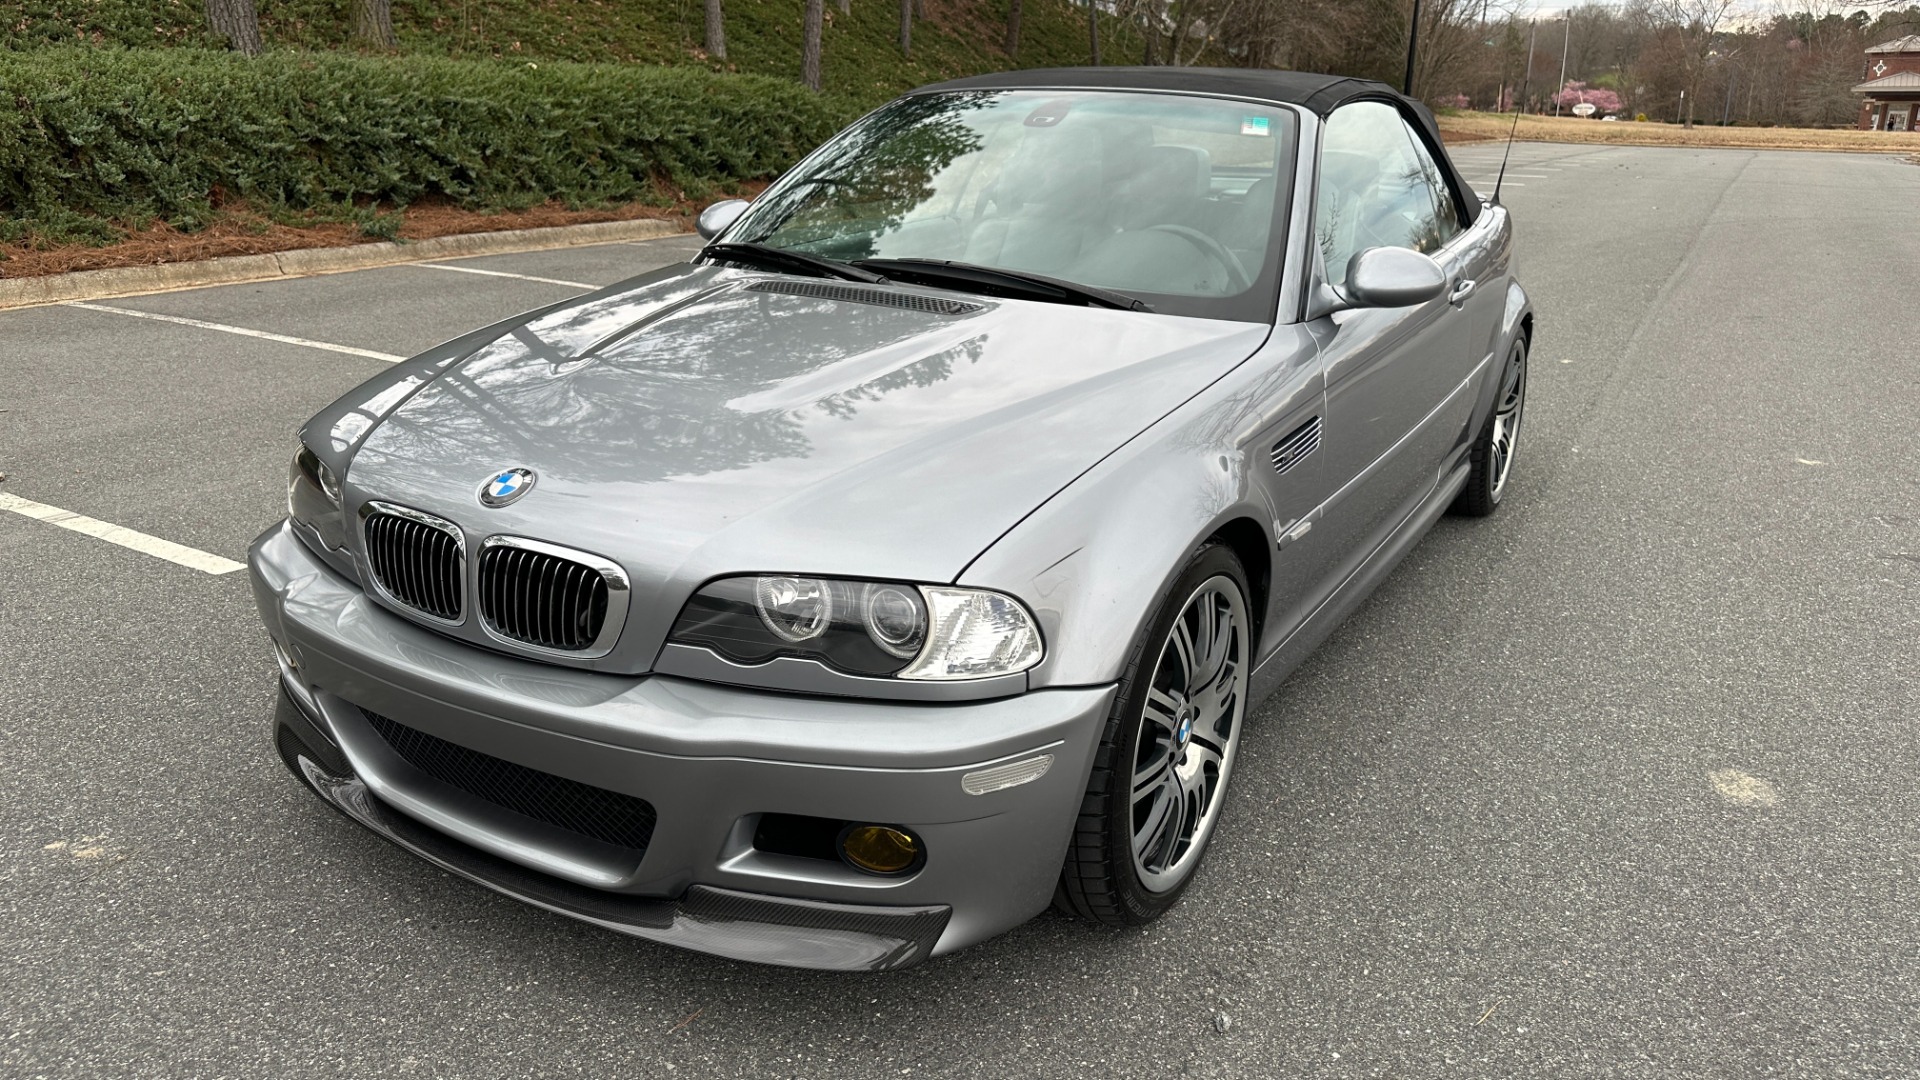 Used 2006 BMW M3 CONVERTIBLE / SMG AUTO / LEATHER / INLINE 6CYL / CARBON FIBER for sale $26,595 at Formula Imports in Charlotte NC 28227 42